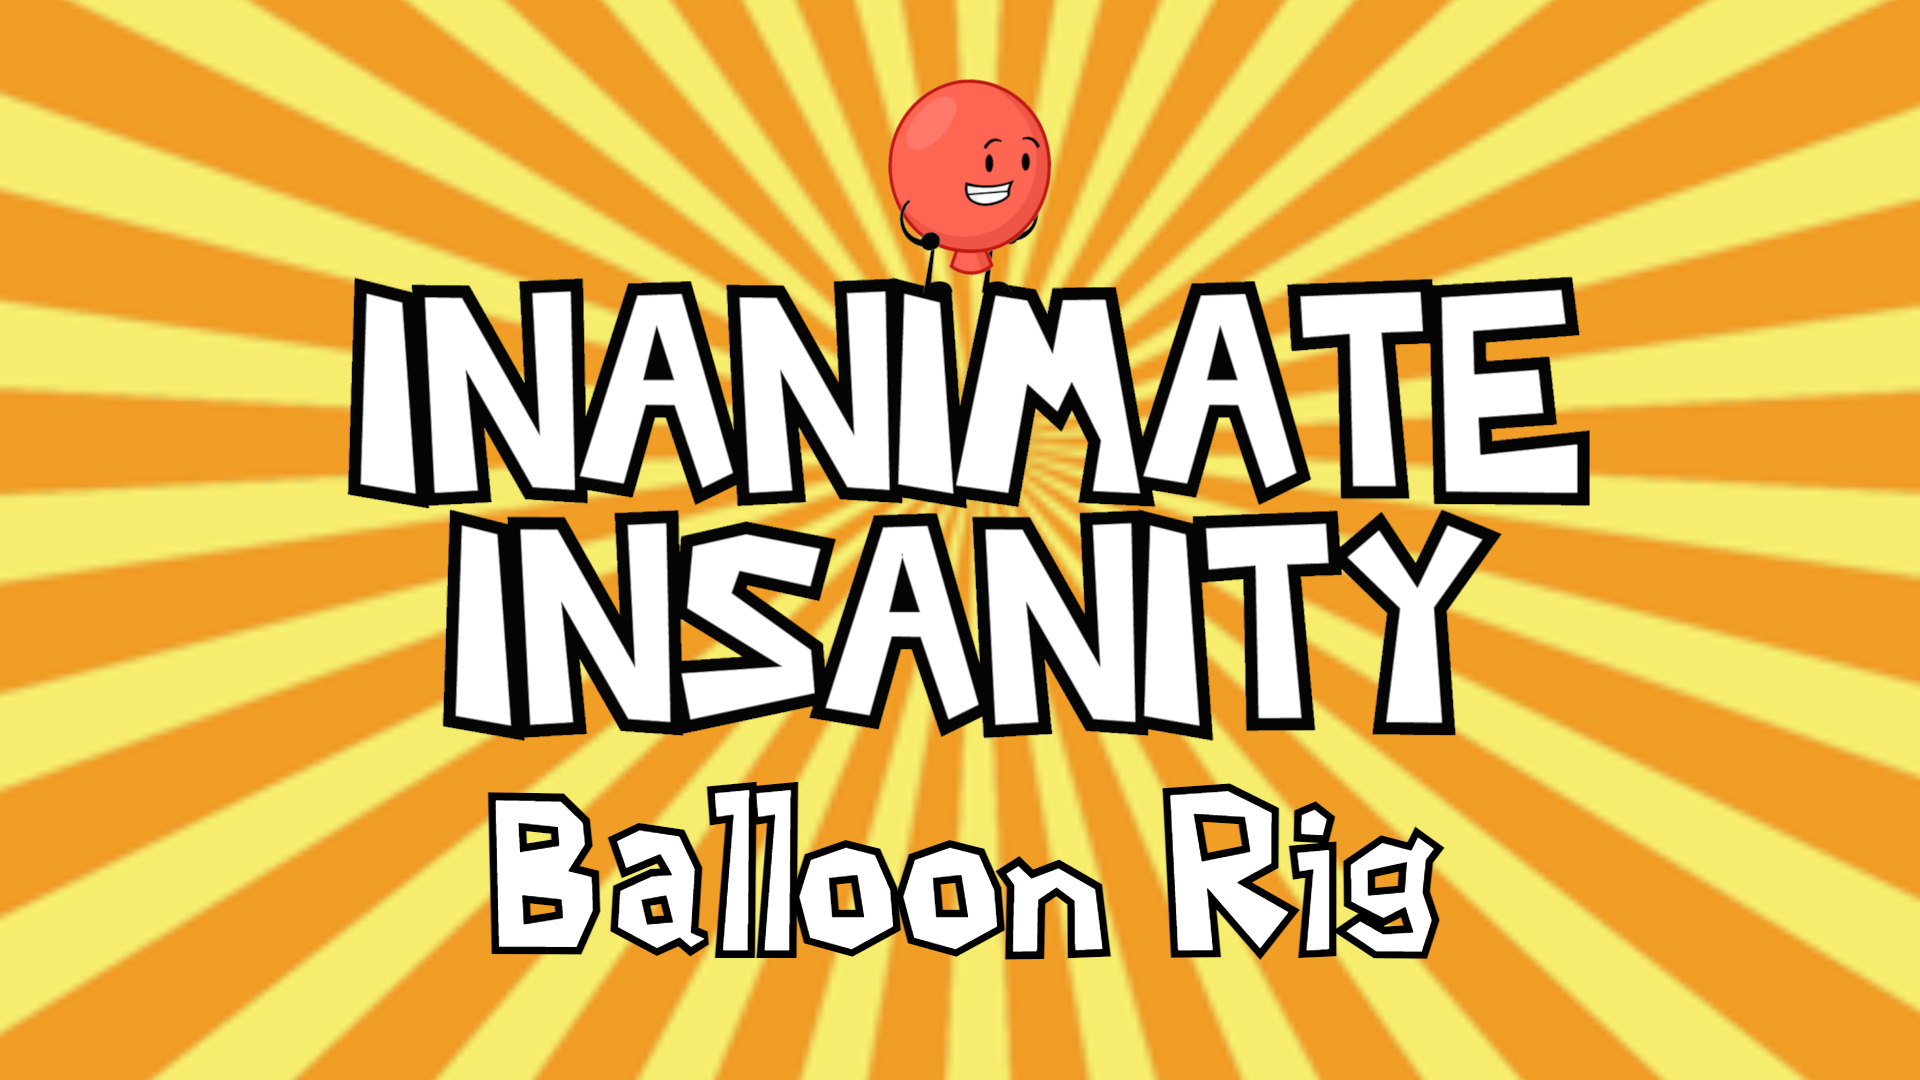 Inanimate Insanity Balloon Rig preview image 1